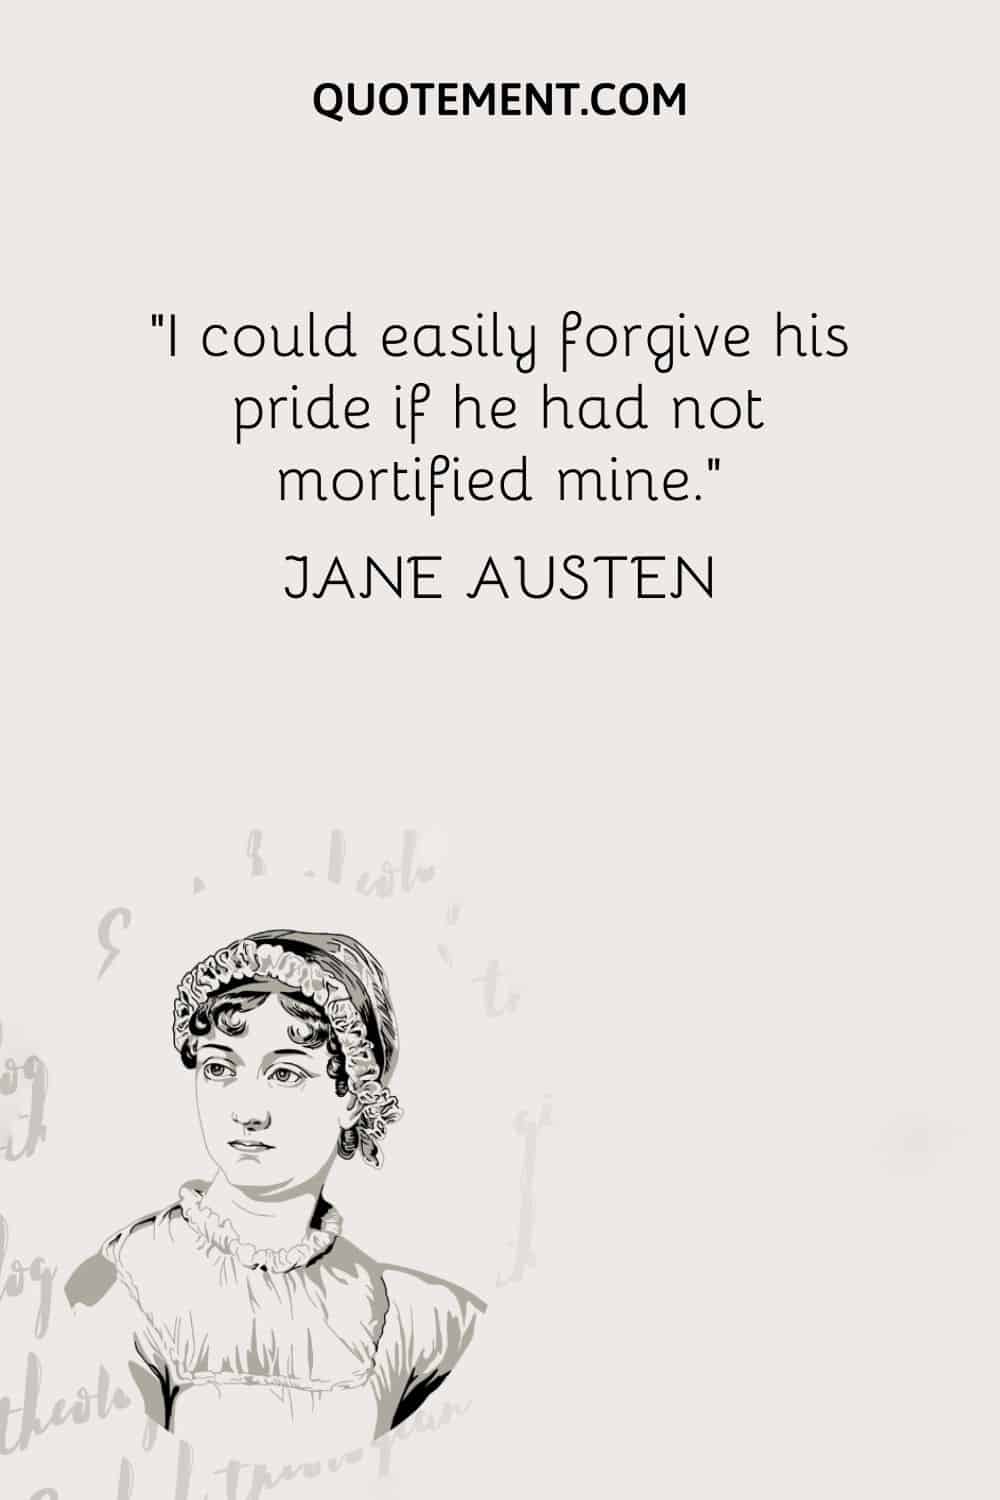 I could easily forgive his pride if he had not mortified mine. — Jane Austen